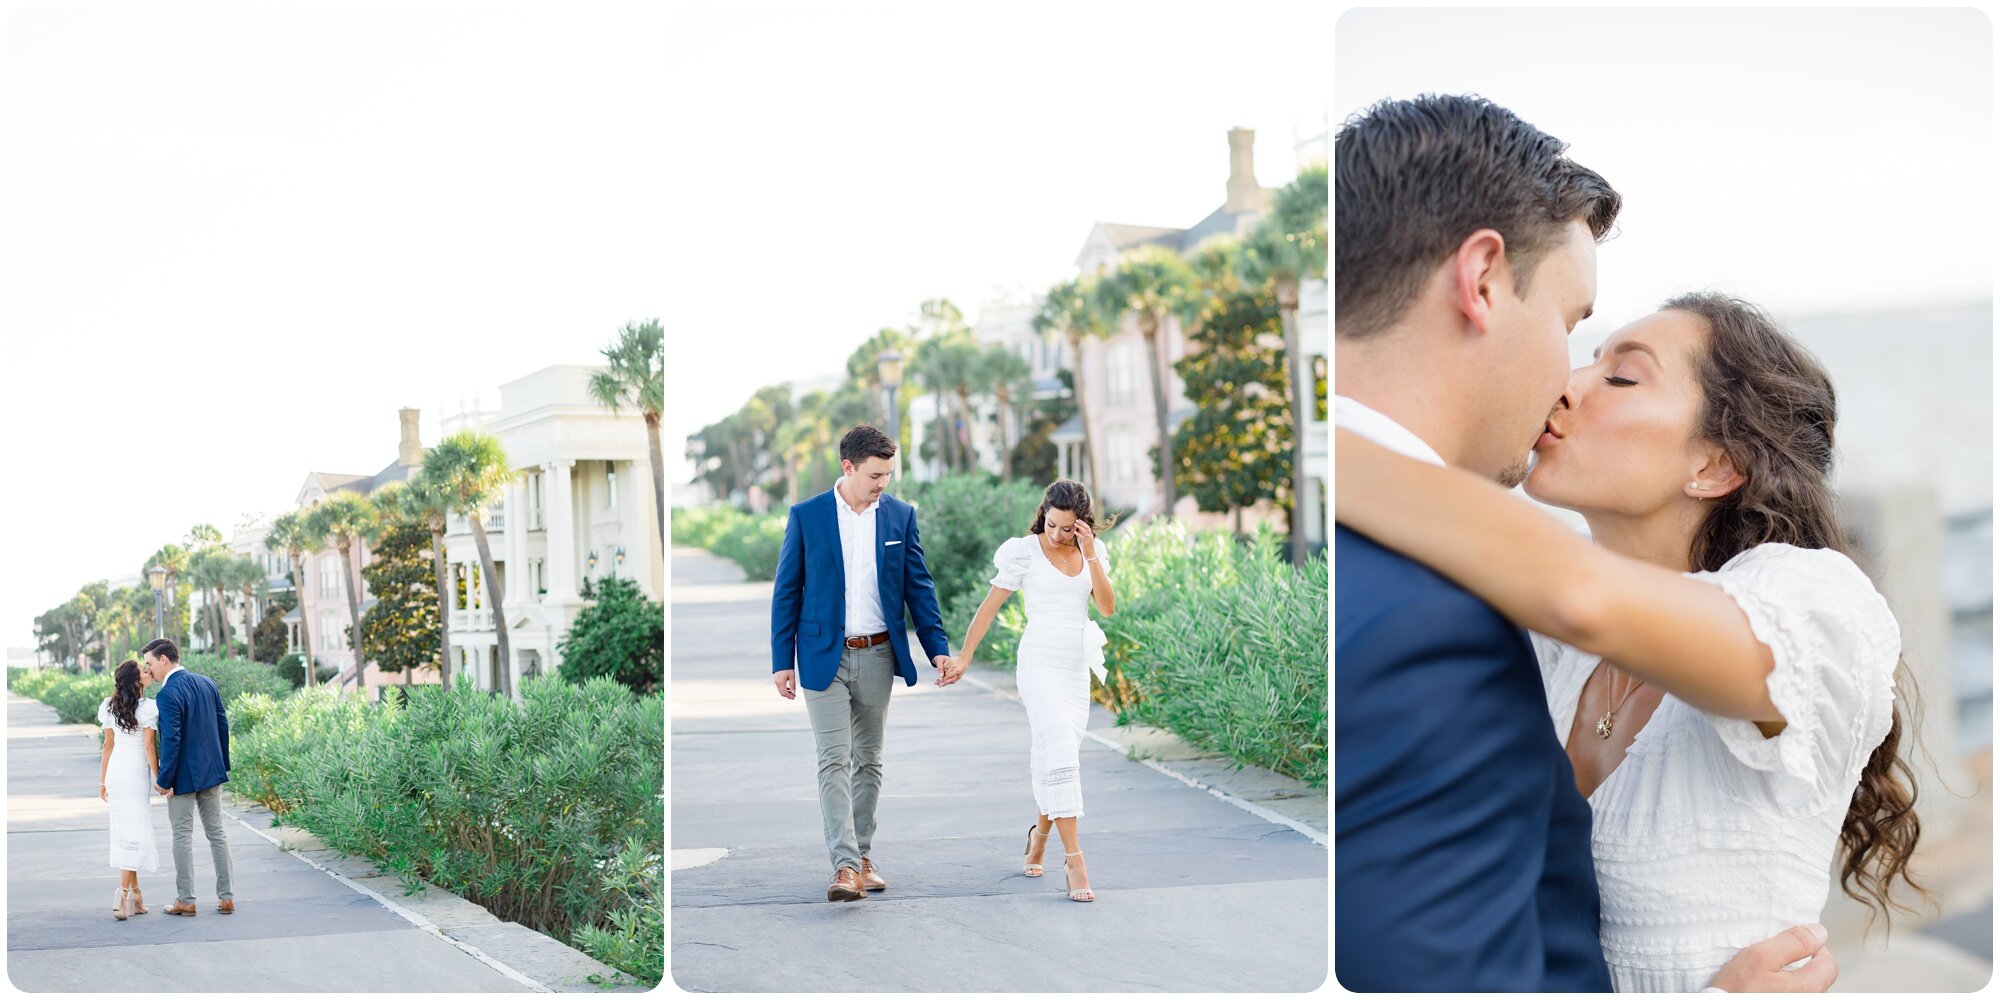 outdoor_engagement_session_candid_natural_charleston_destination_wedding_rainbow_row_colorful_kailee_dimeglio_photography_0012.jpg